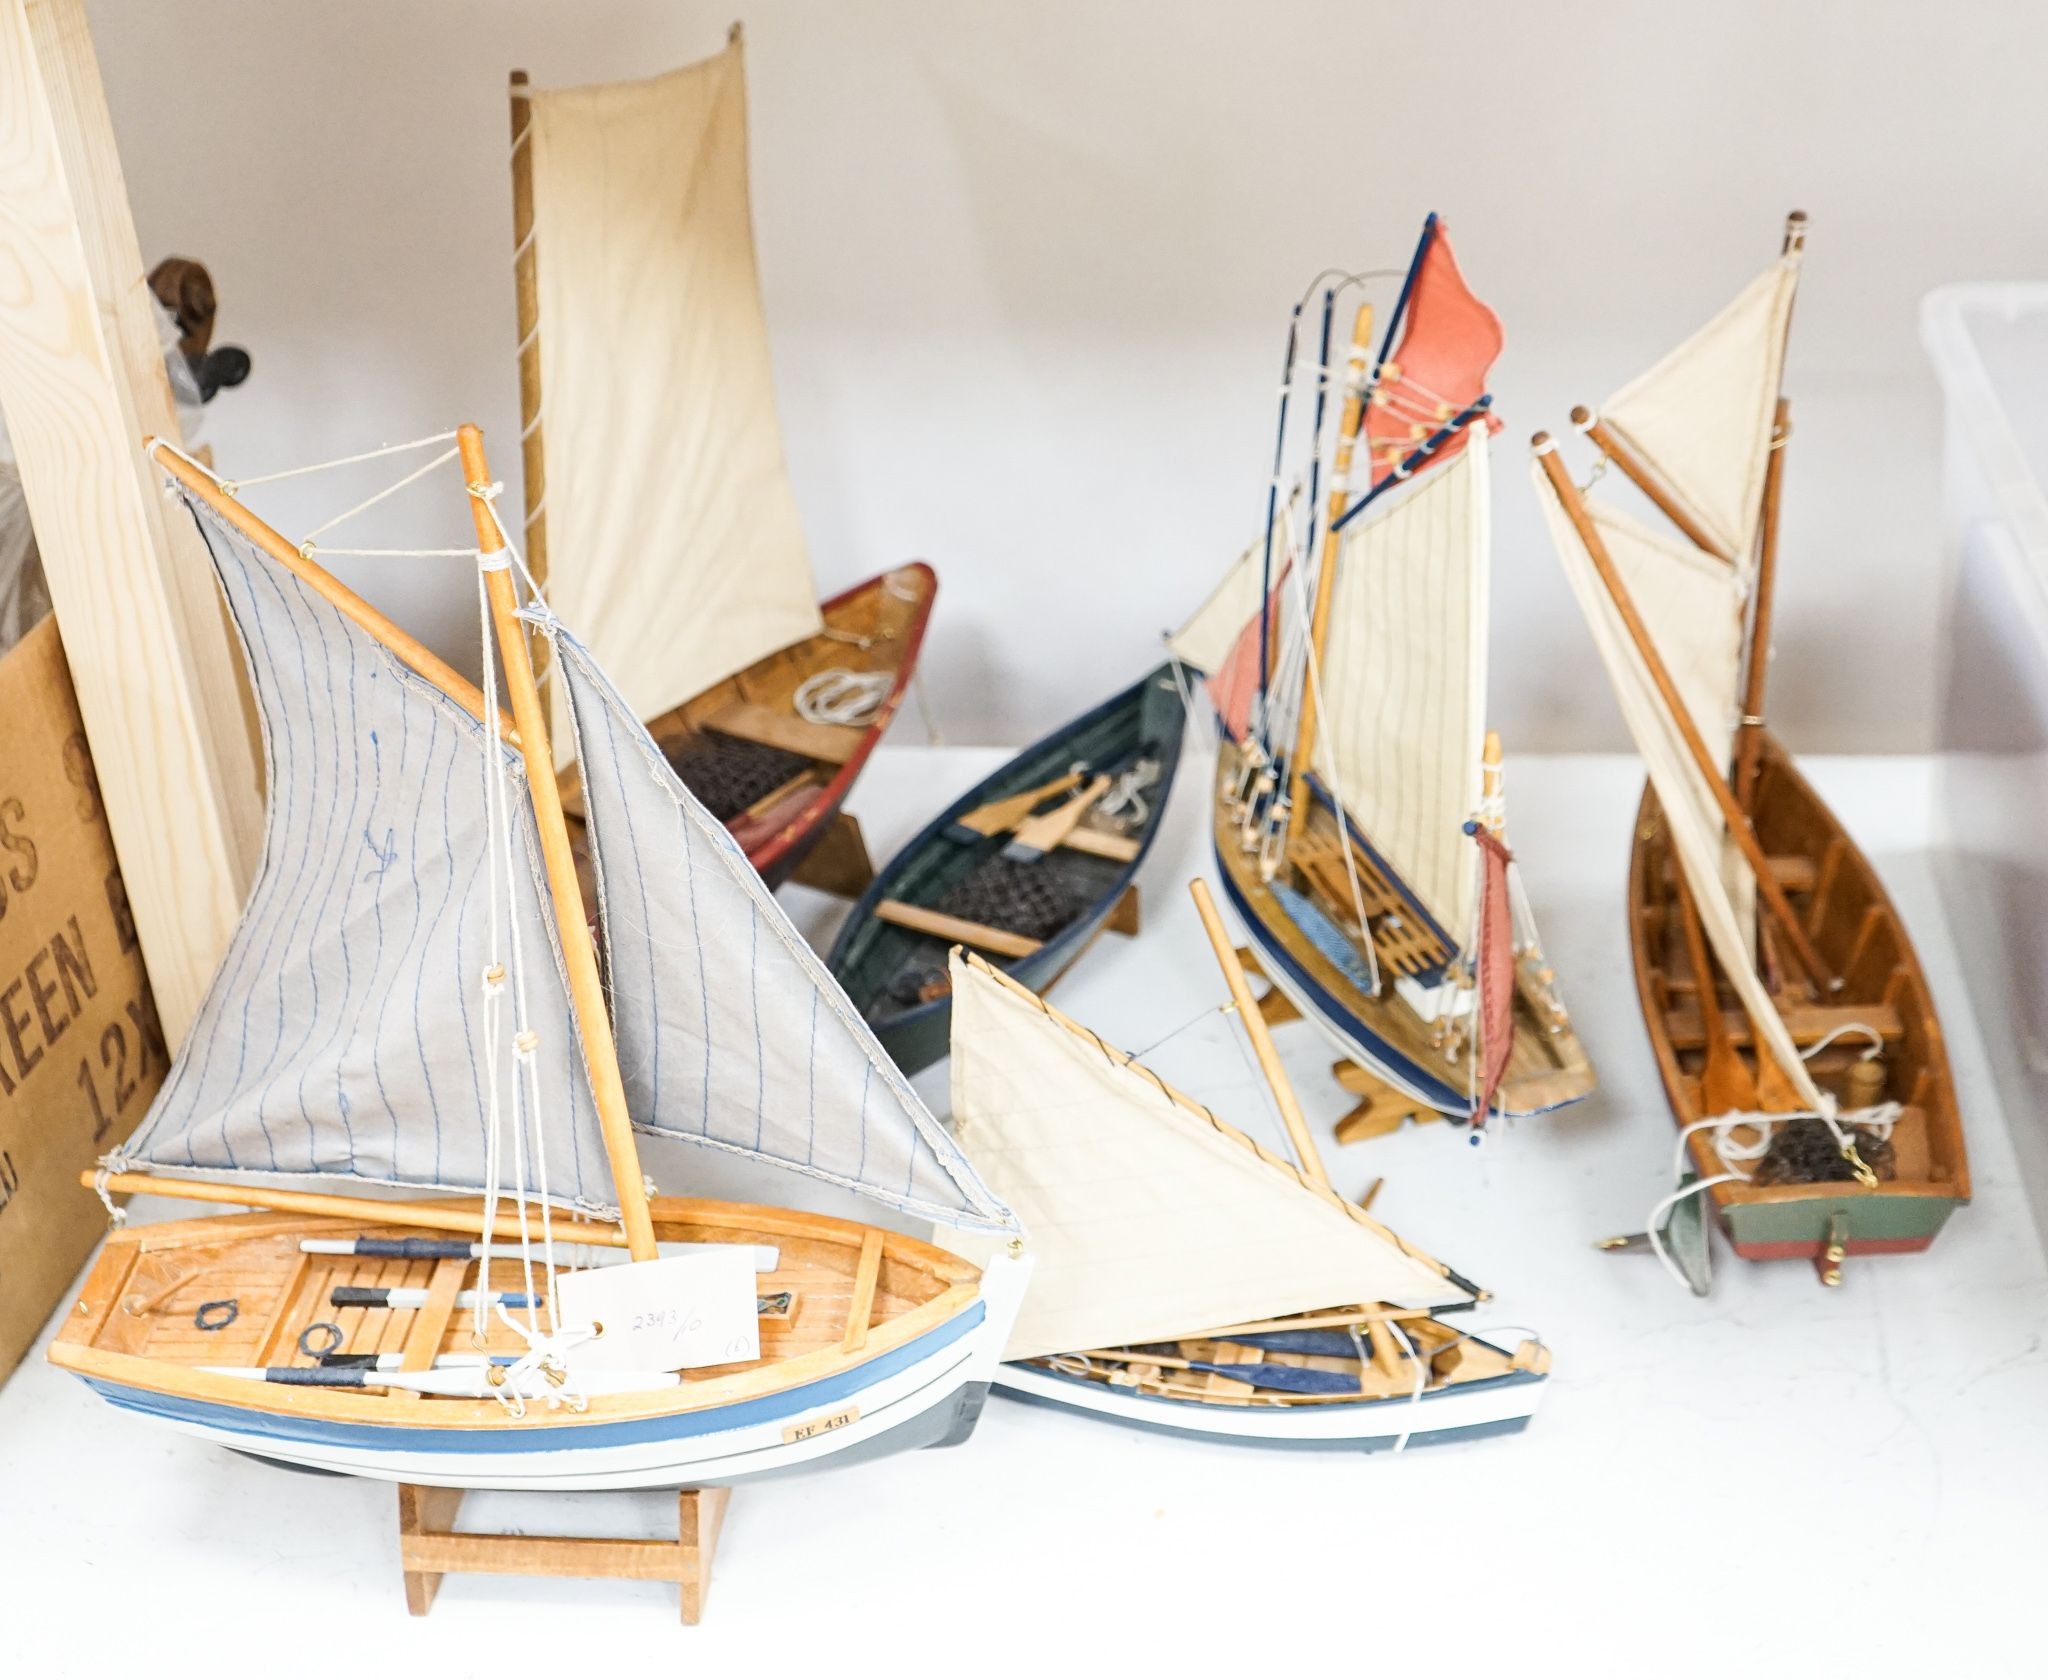 A group of six painted wood boat models